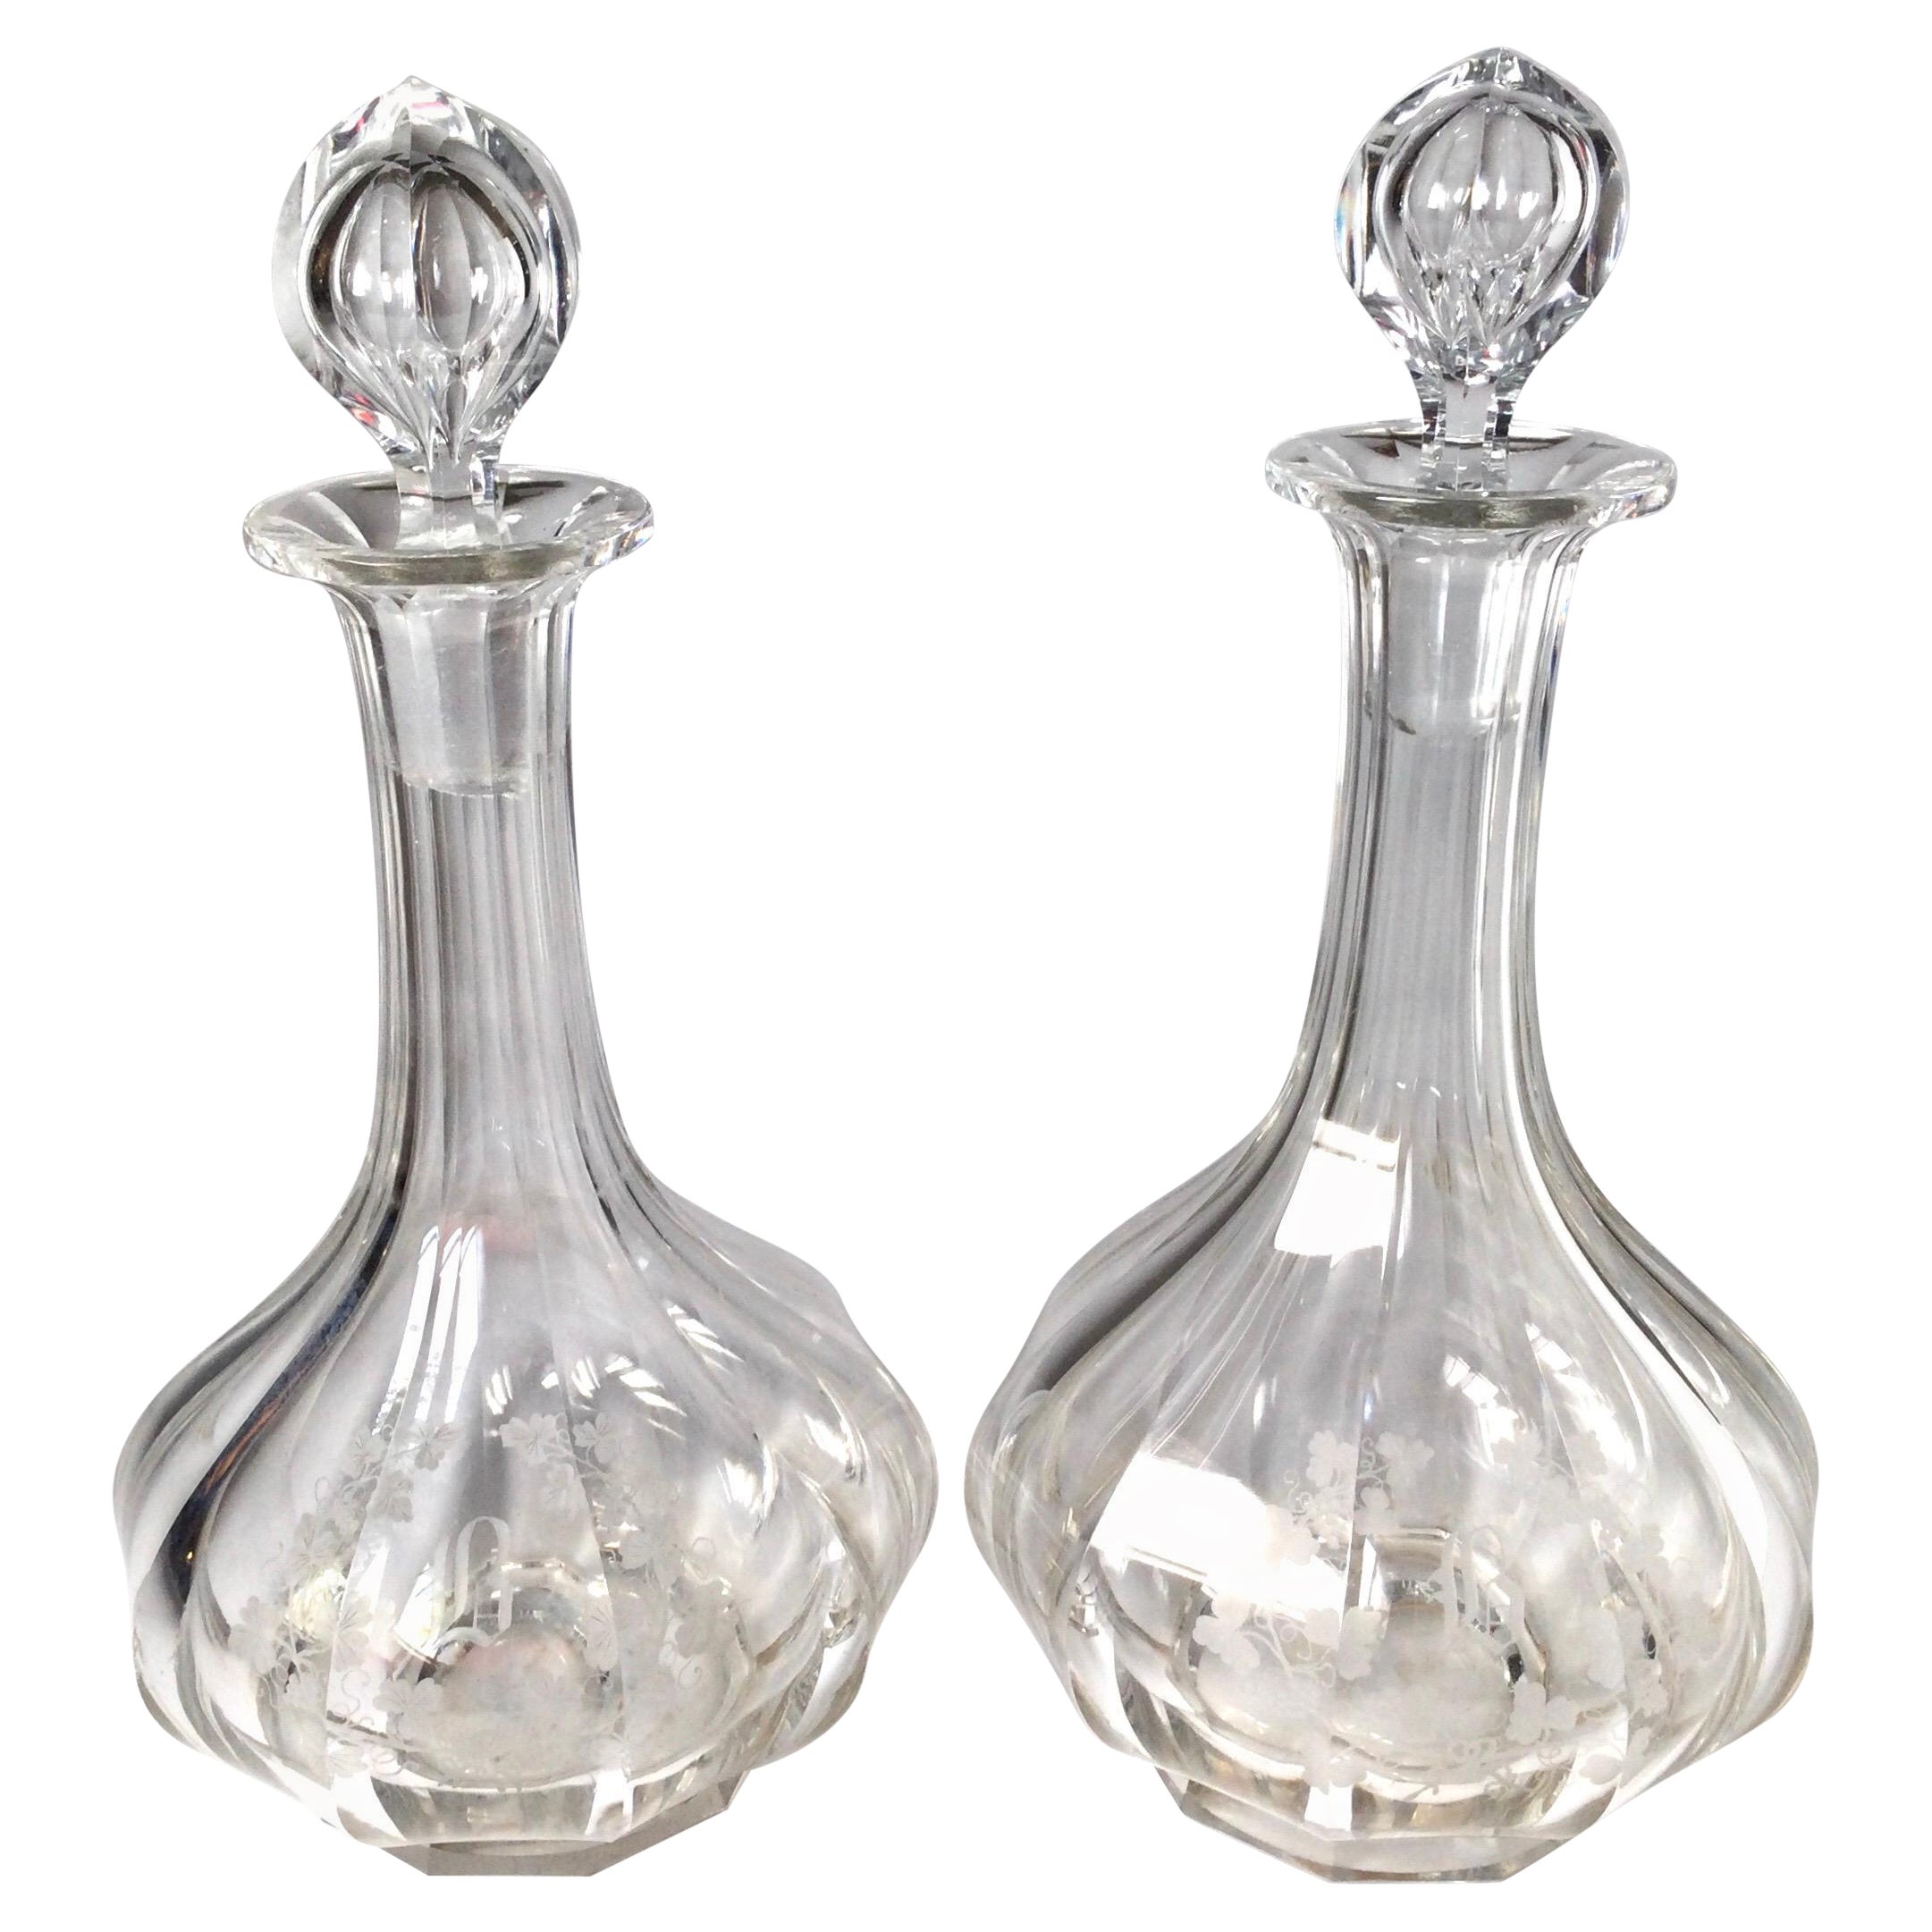 Pair of Circa 1900 Panel Cut and Engraved Decanters For Sale